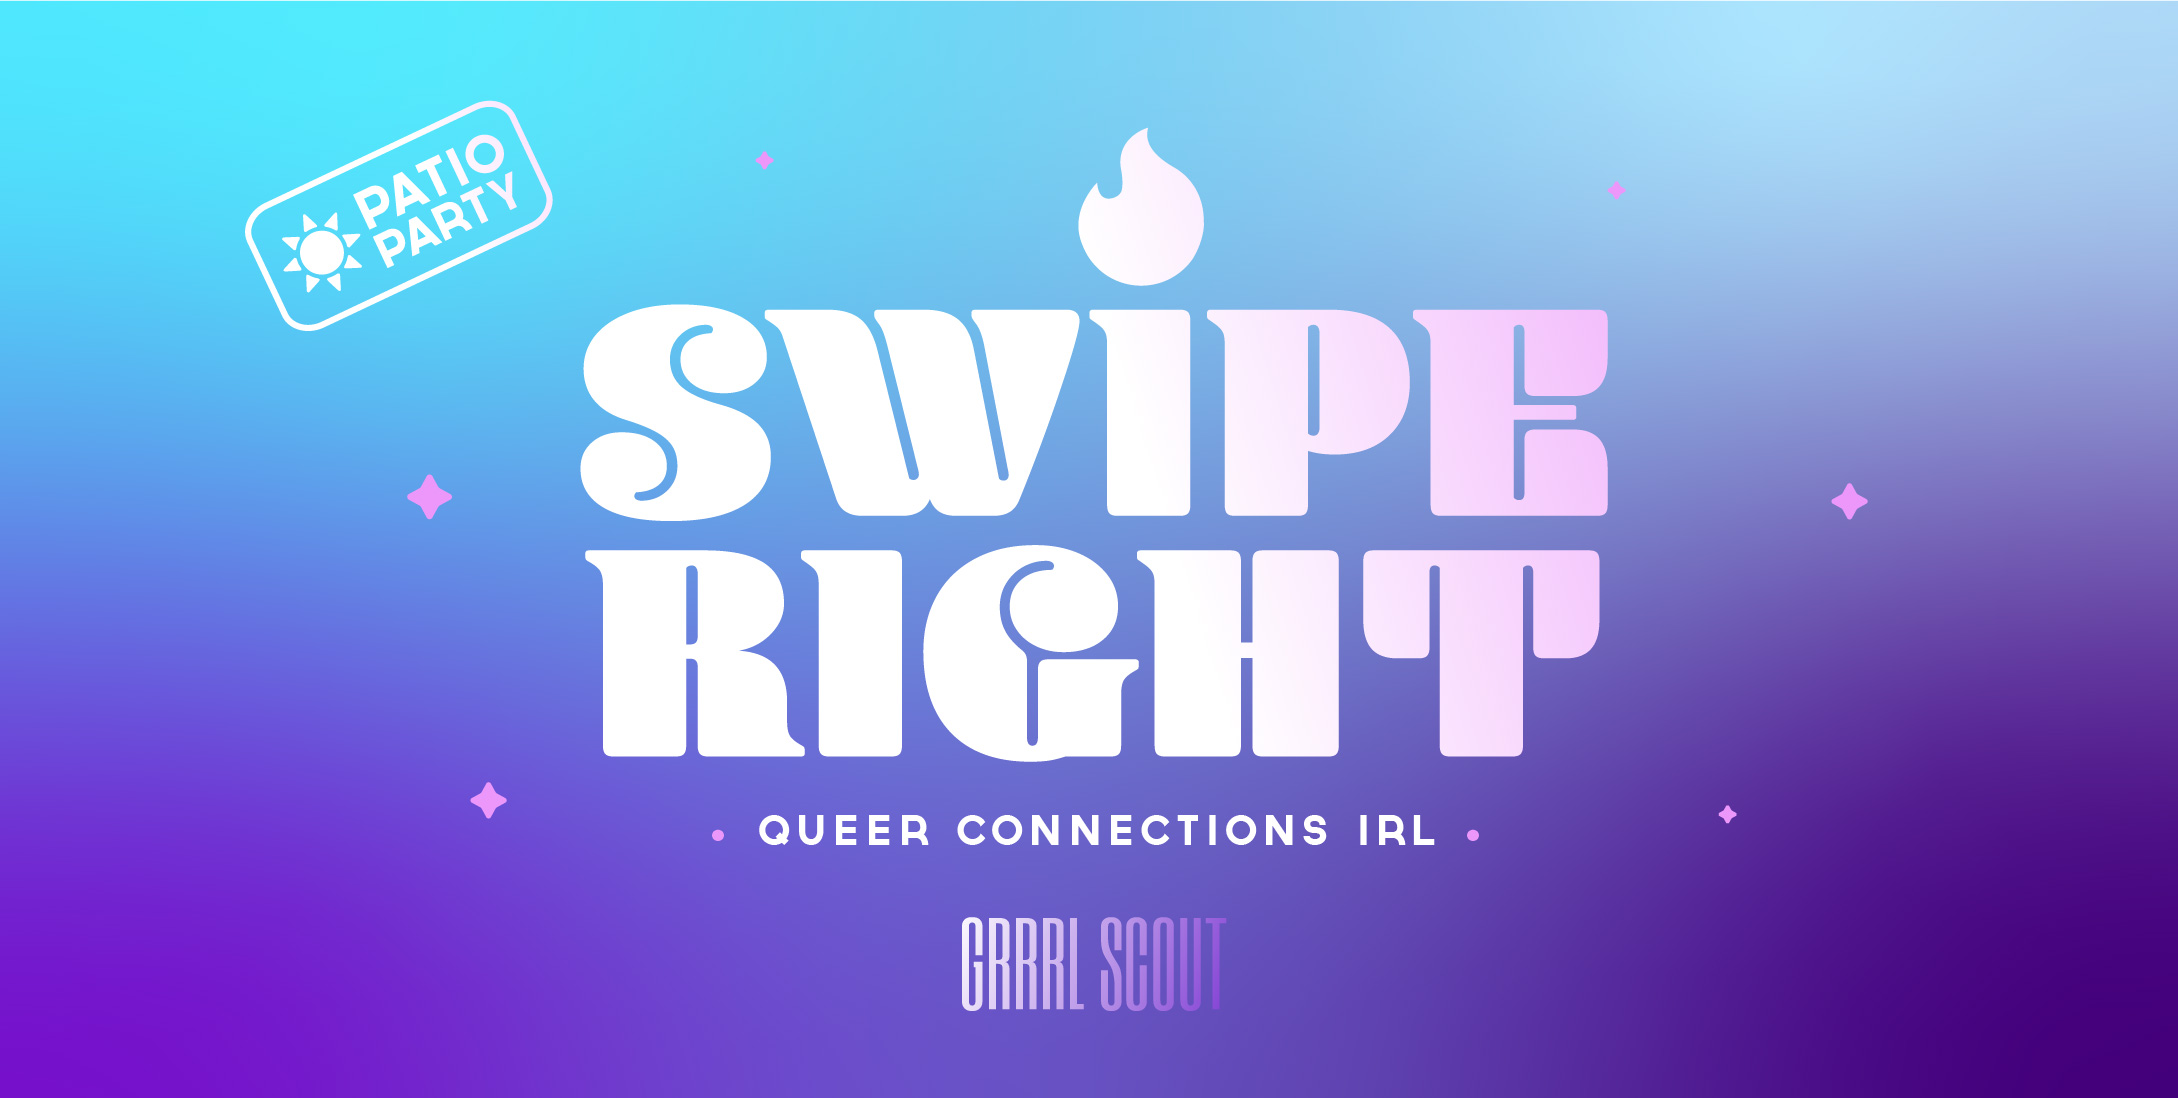 Swipe Right - Queer Connections IRL PATIO PARTY EDITION Date: 6/22/2022 (Wednesday) Time: 7:00 p.m. – 11:00 p.m. Parking: Street parking Tickets: 21+ Event/Limited Tickets Available $10 + Fees (Early Bird) $15 + Fees (Advance) $20 + Fees (Day of) Entrance: Patio Entrance (Minnehaha Ave) Music: DJ Mommy Long Legs 7:00 p.m. - 10:00 p.m. Dancing (Body Movin) 10:00 p.m. - 11:00 p.m. Wine Down (Smooth Jams ) Features: Outdoor Bars Music/Dancing Patio Vibes (Partial Covered) Outdoor Games Taco Truck